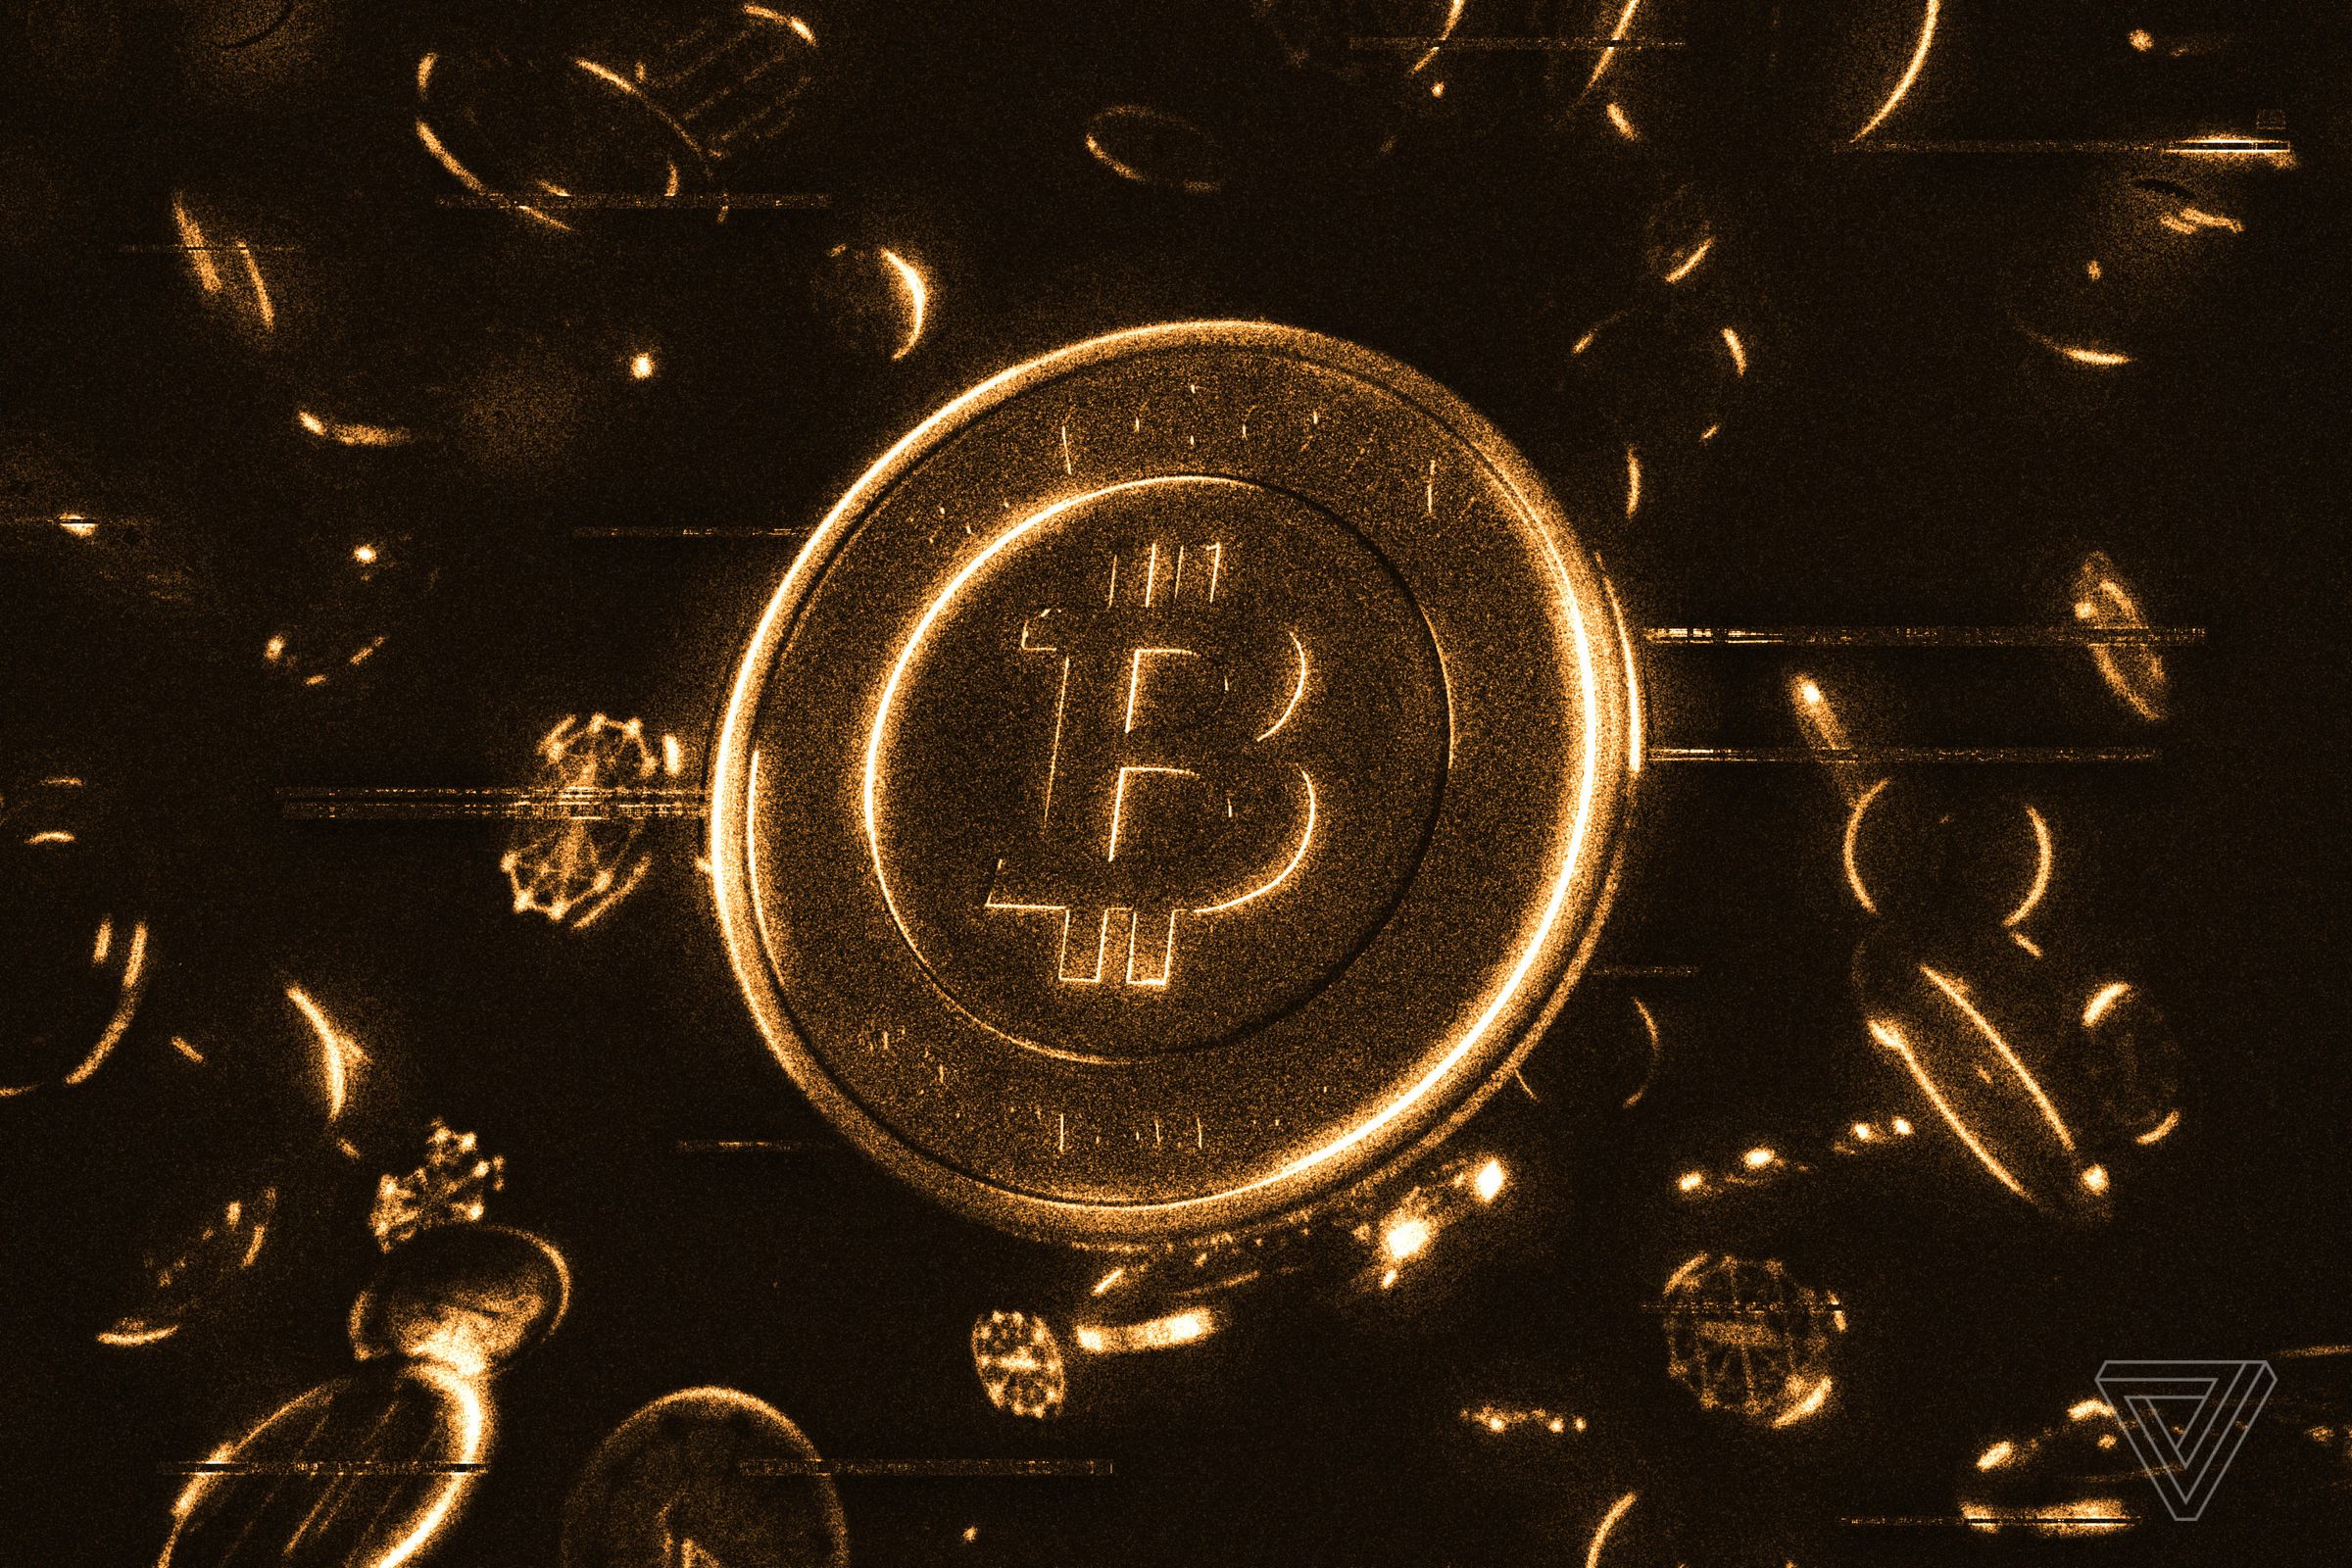 An image of the Bitcoin logo on a gold coin surrounded by other coins